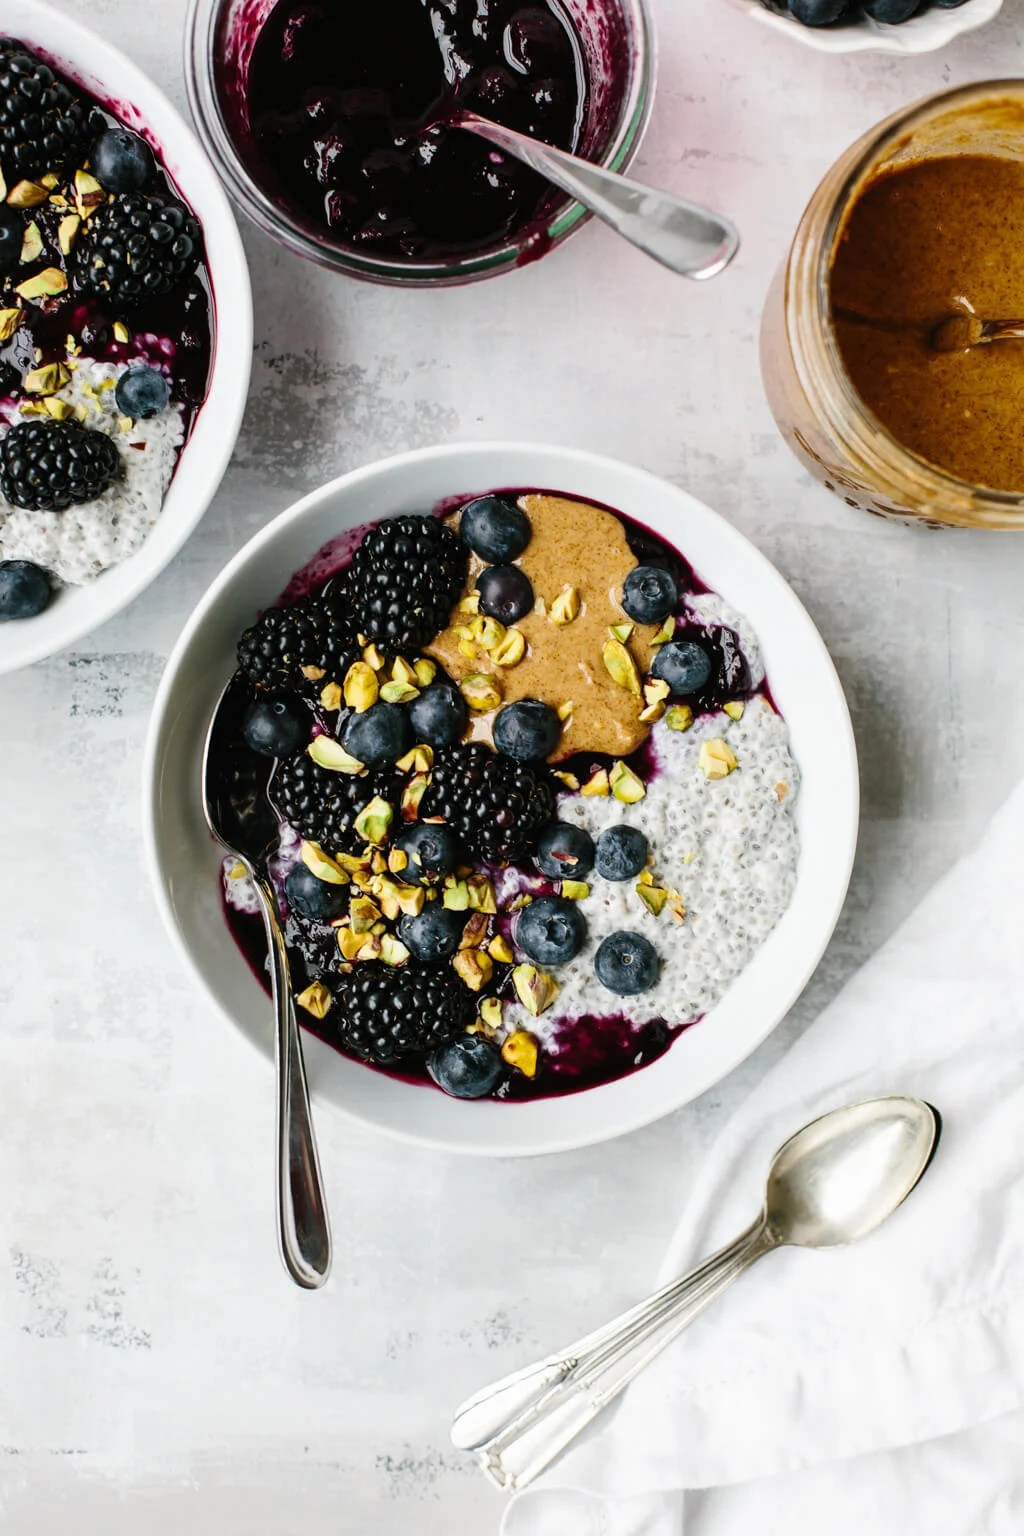 This peanut butter and jelly chia pudding (or almond butter and blueberry puree chia pudding) tastes just like a PB&J sandwich. It's a delicious, healthy breakfast recipe!